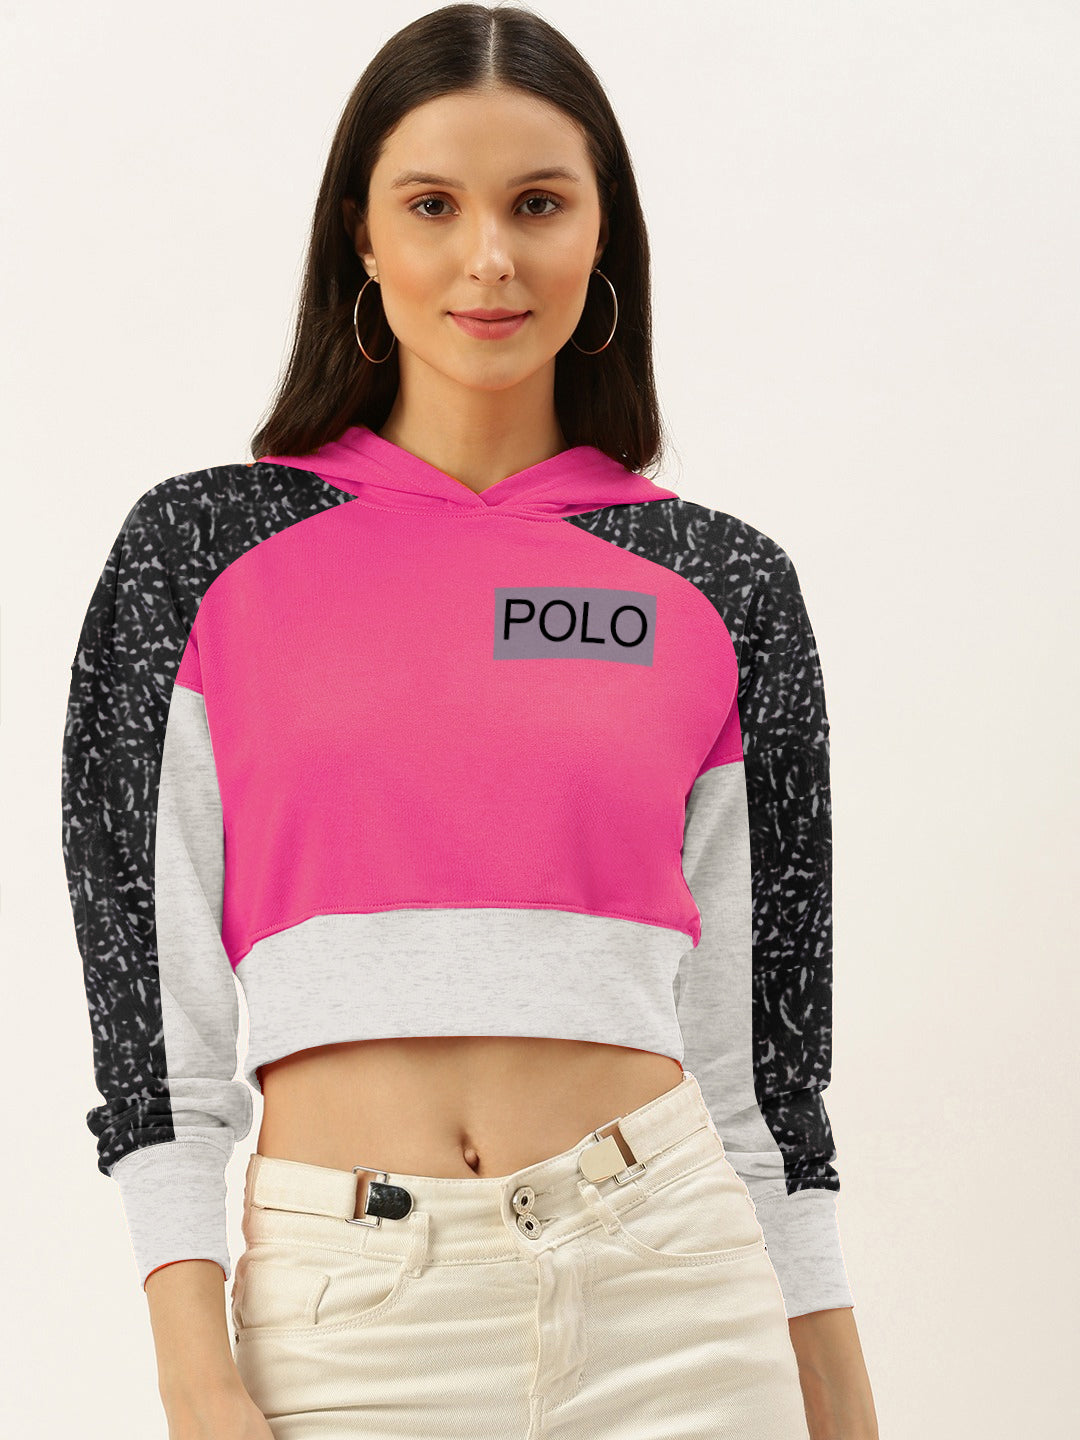 NYC Polo Fleece Short Length Pullover Hoodie For Ladies-Magenta with Grey Melange & Black-BE652